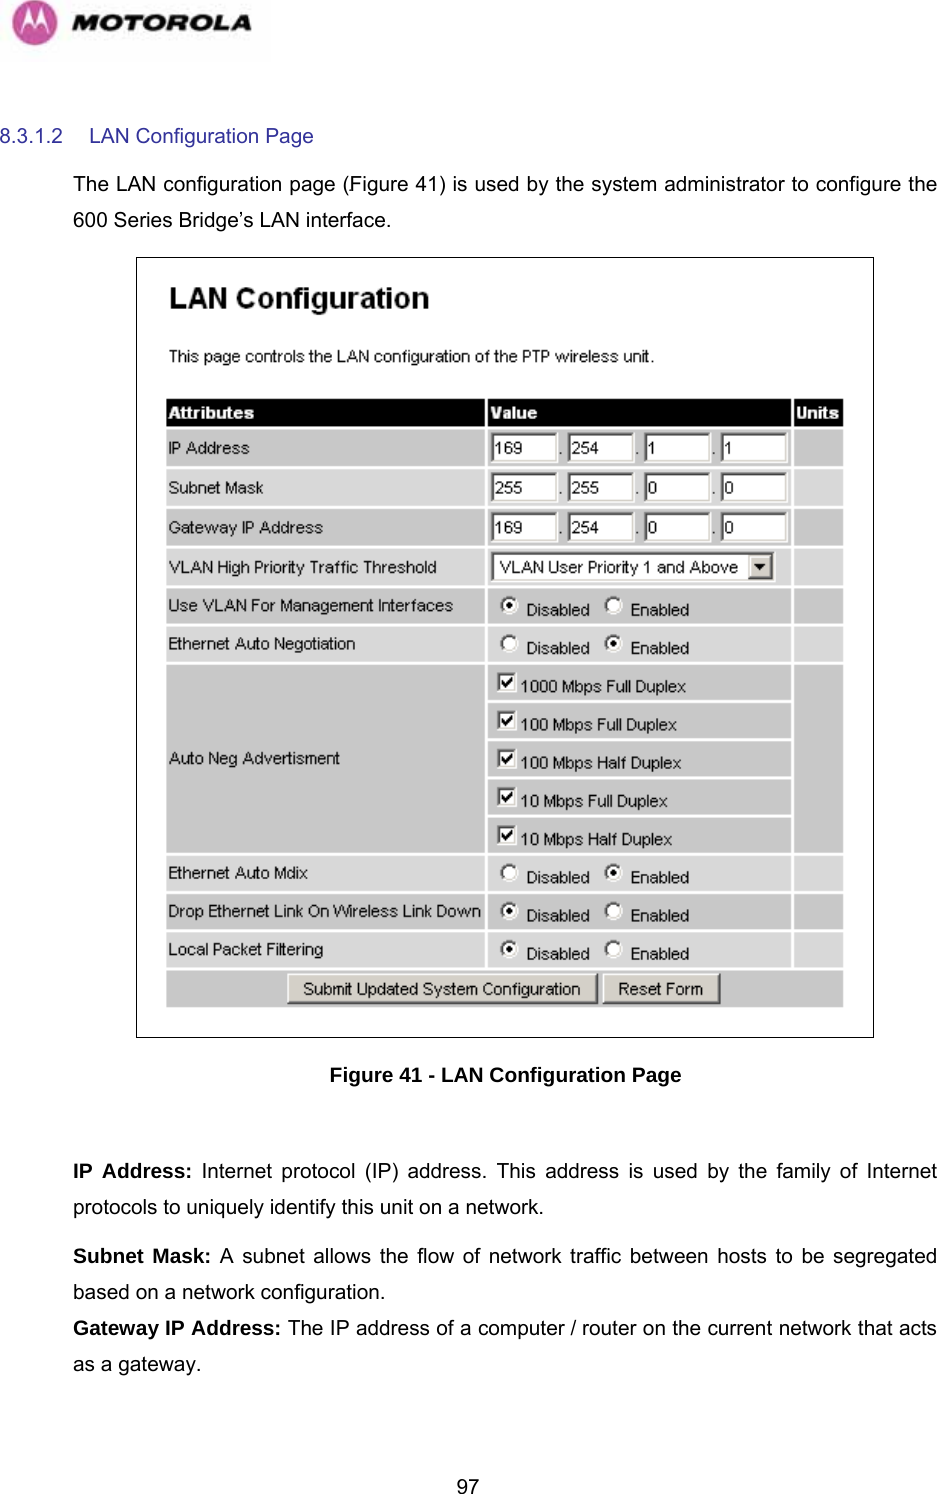   978.3.1.2  LAN Configuration Page The LAN configuration page (1064HFigure 41) is used by the system administrator to configure the 600 Series Bridge’s LAN interface.  Figure 41 - LAN Configuration Page  IP Address: Internet protocol (IP) address. This address is used by the family of Internet protocols to uniquely identify this unit on a network.  Subnet Mask: A subnet allows the flow of network traffic between hosts to be segregated based on a network configuration.  Gateway IP Address: The IP address of a computer / router on the current network that acts as a gateway. 